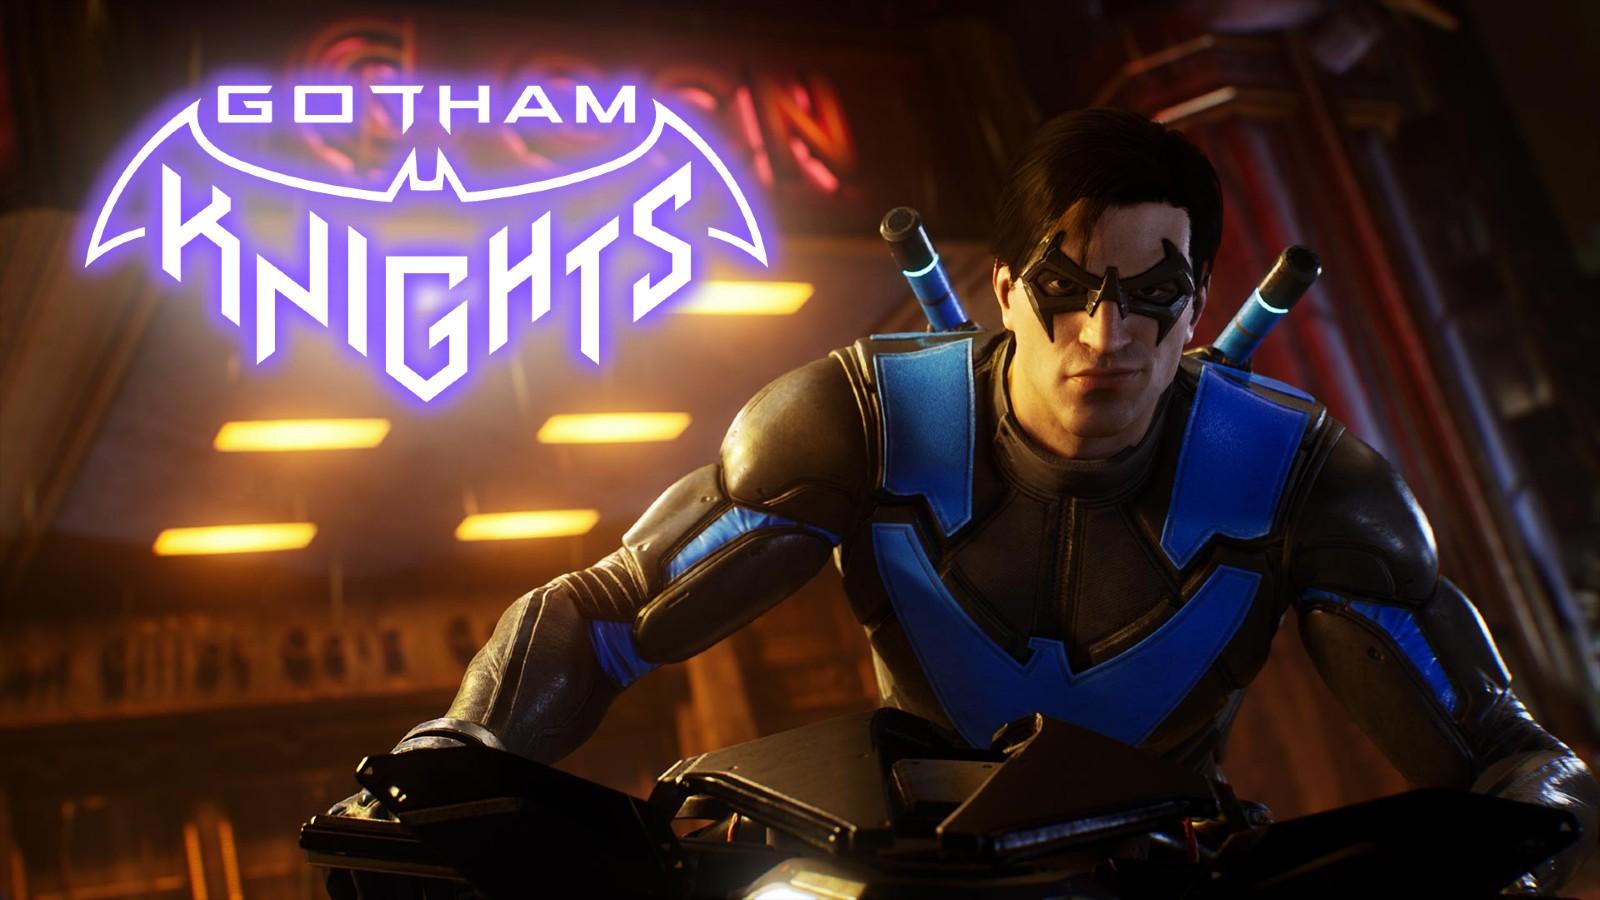 Gotham Knights has a release date